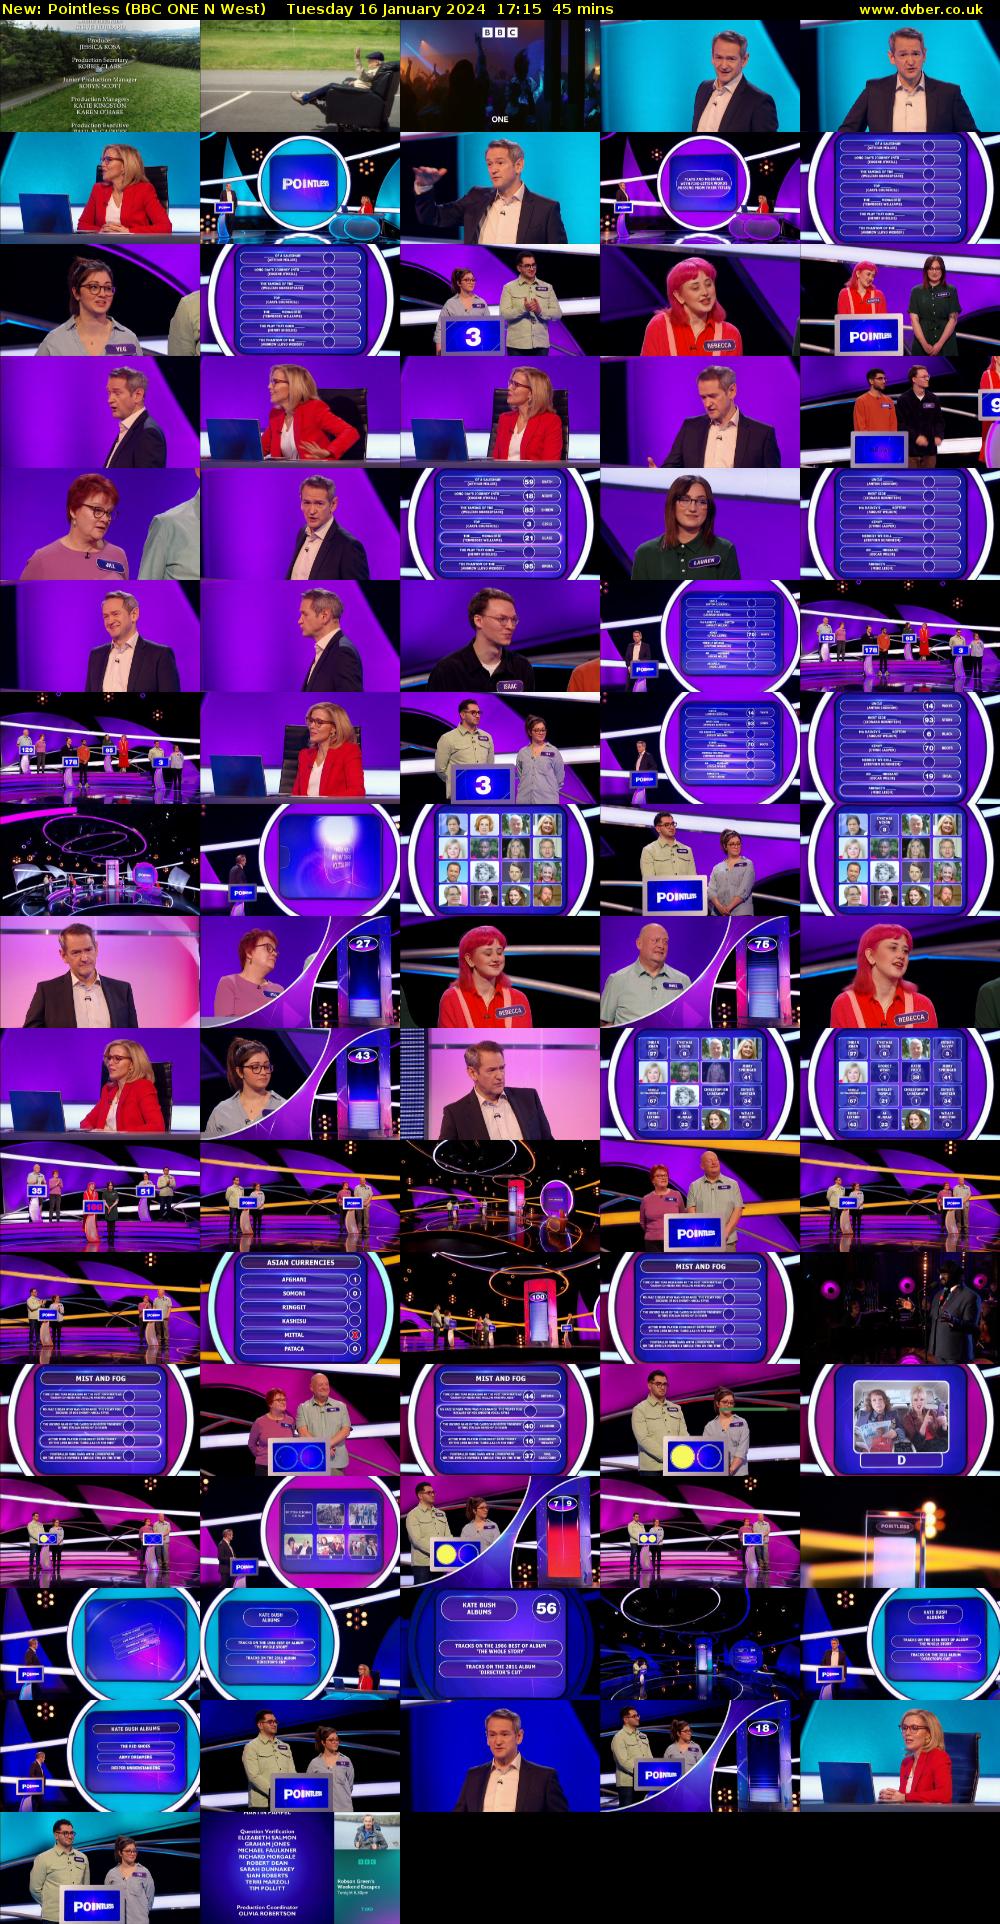 Pointless (BBC ONE N West) Tuesday 16 January 2024 17:15 - 18:00